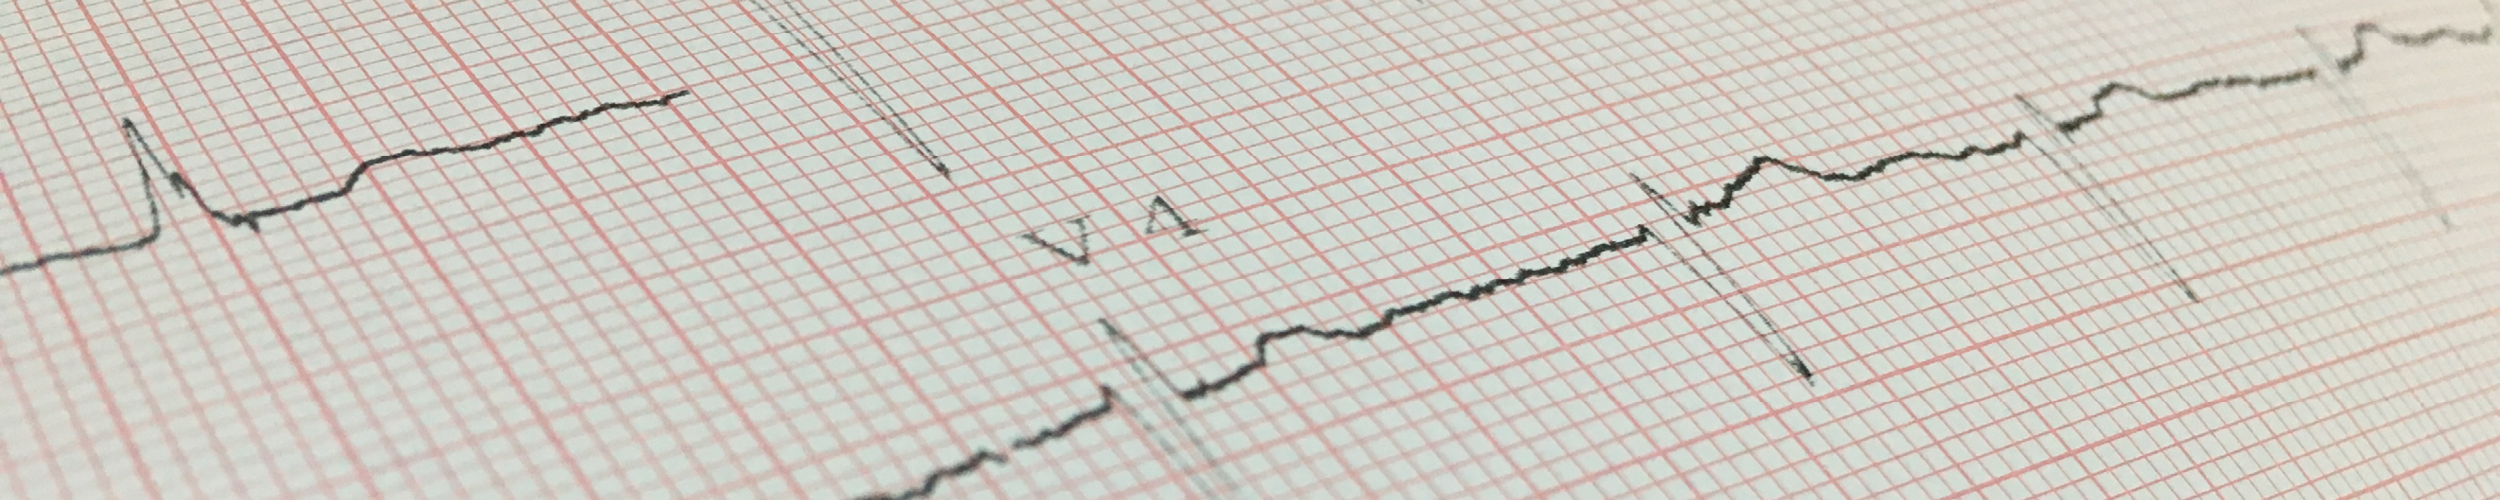 Causes, symptoms and tests for Atrial Fibrillation